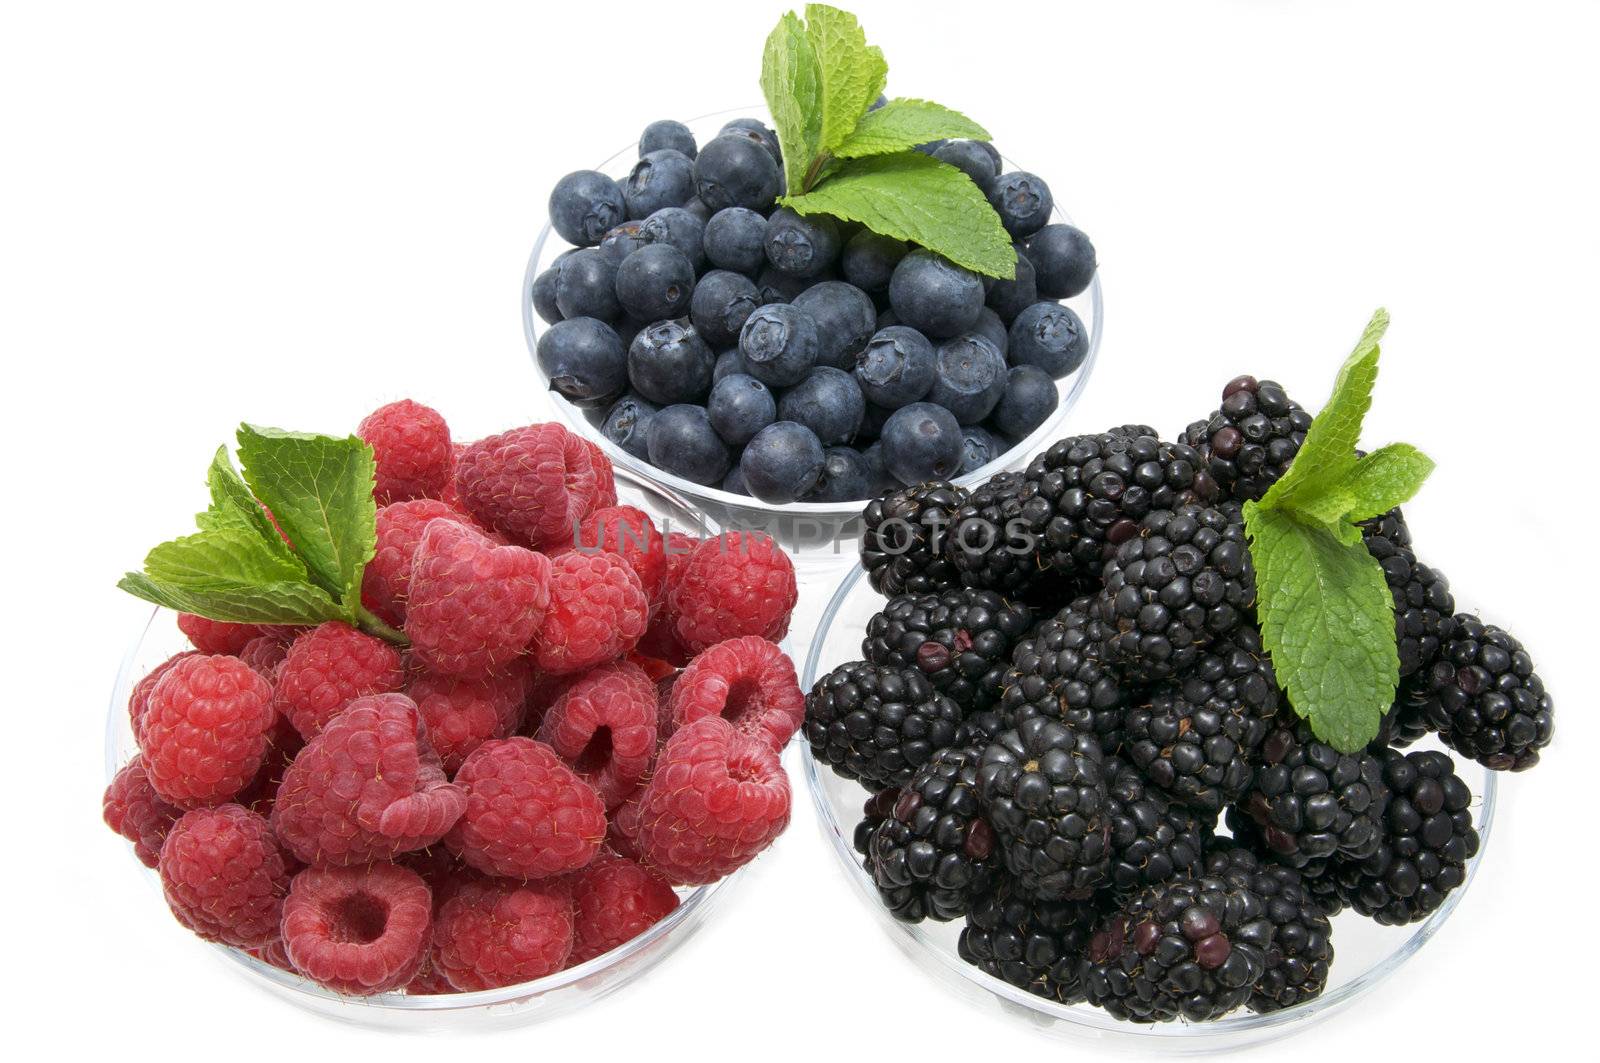 blueberries raspberries and blackberries on a white background in the restaurant